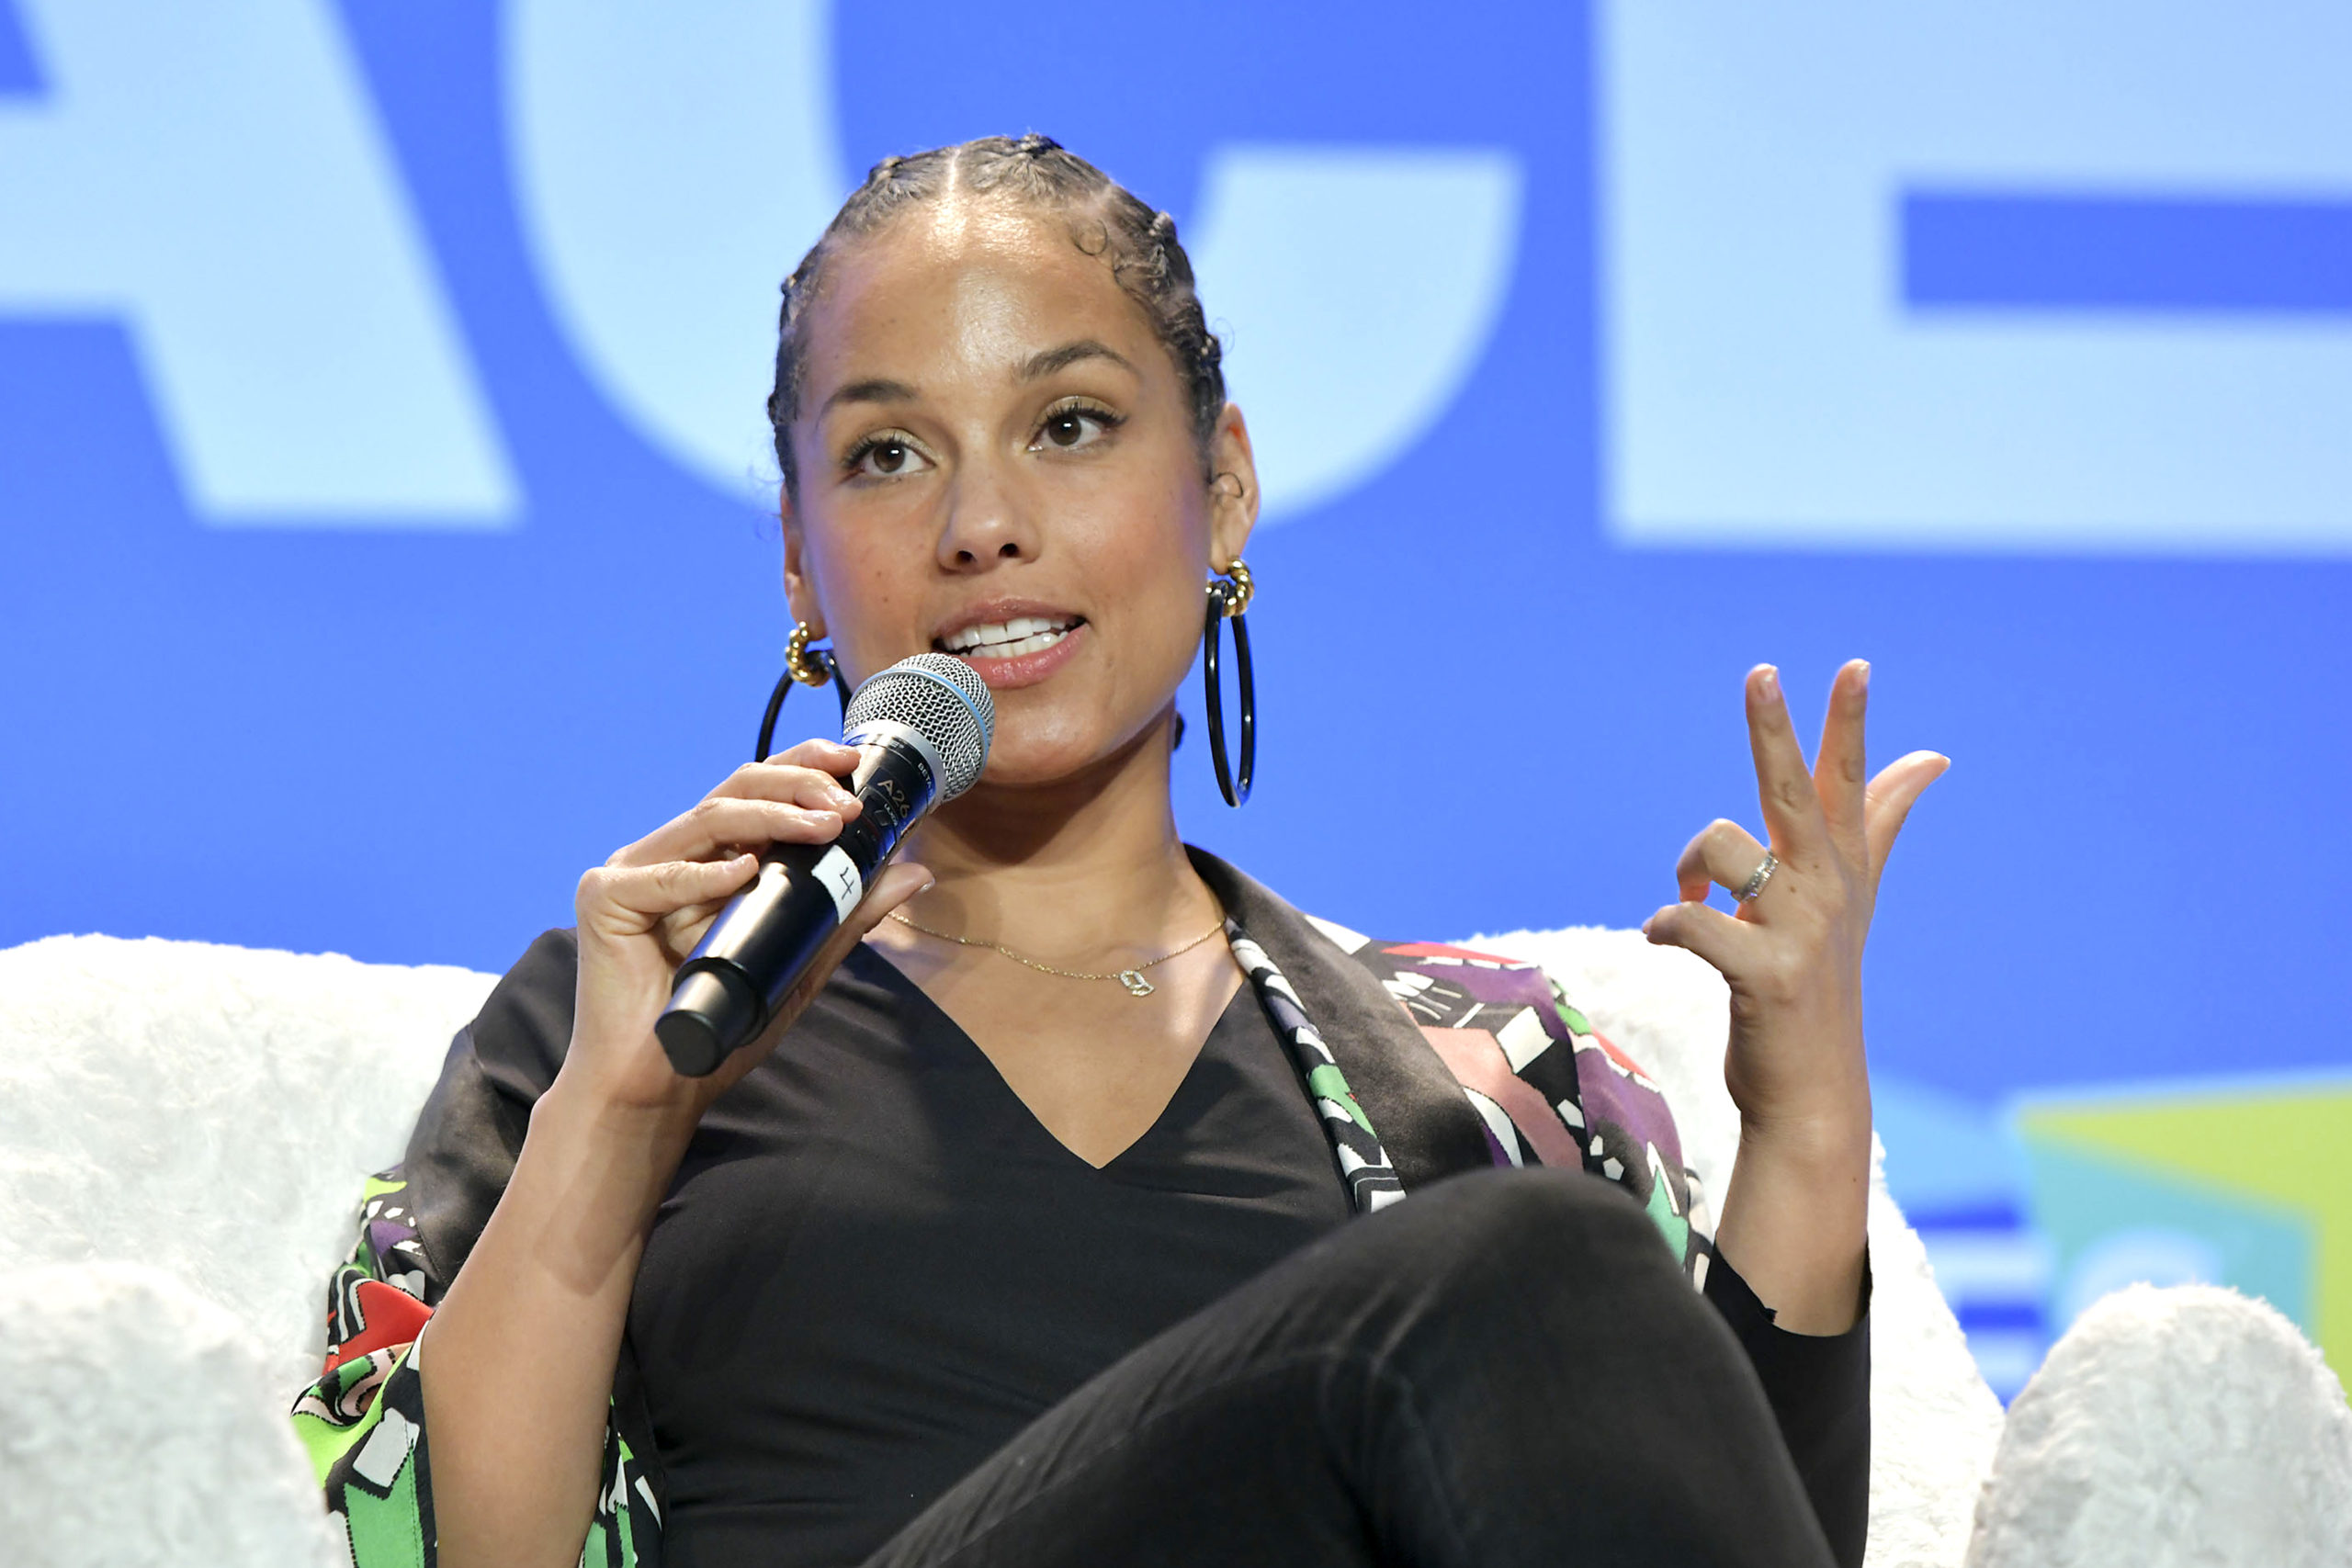 Alicia Keys Recalls Being 'Manipulated' and 'Objectified' by Photographer at 19 in Memoir